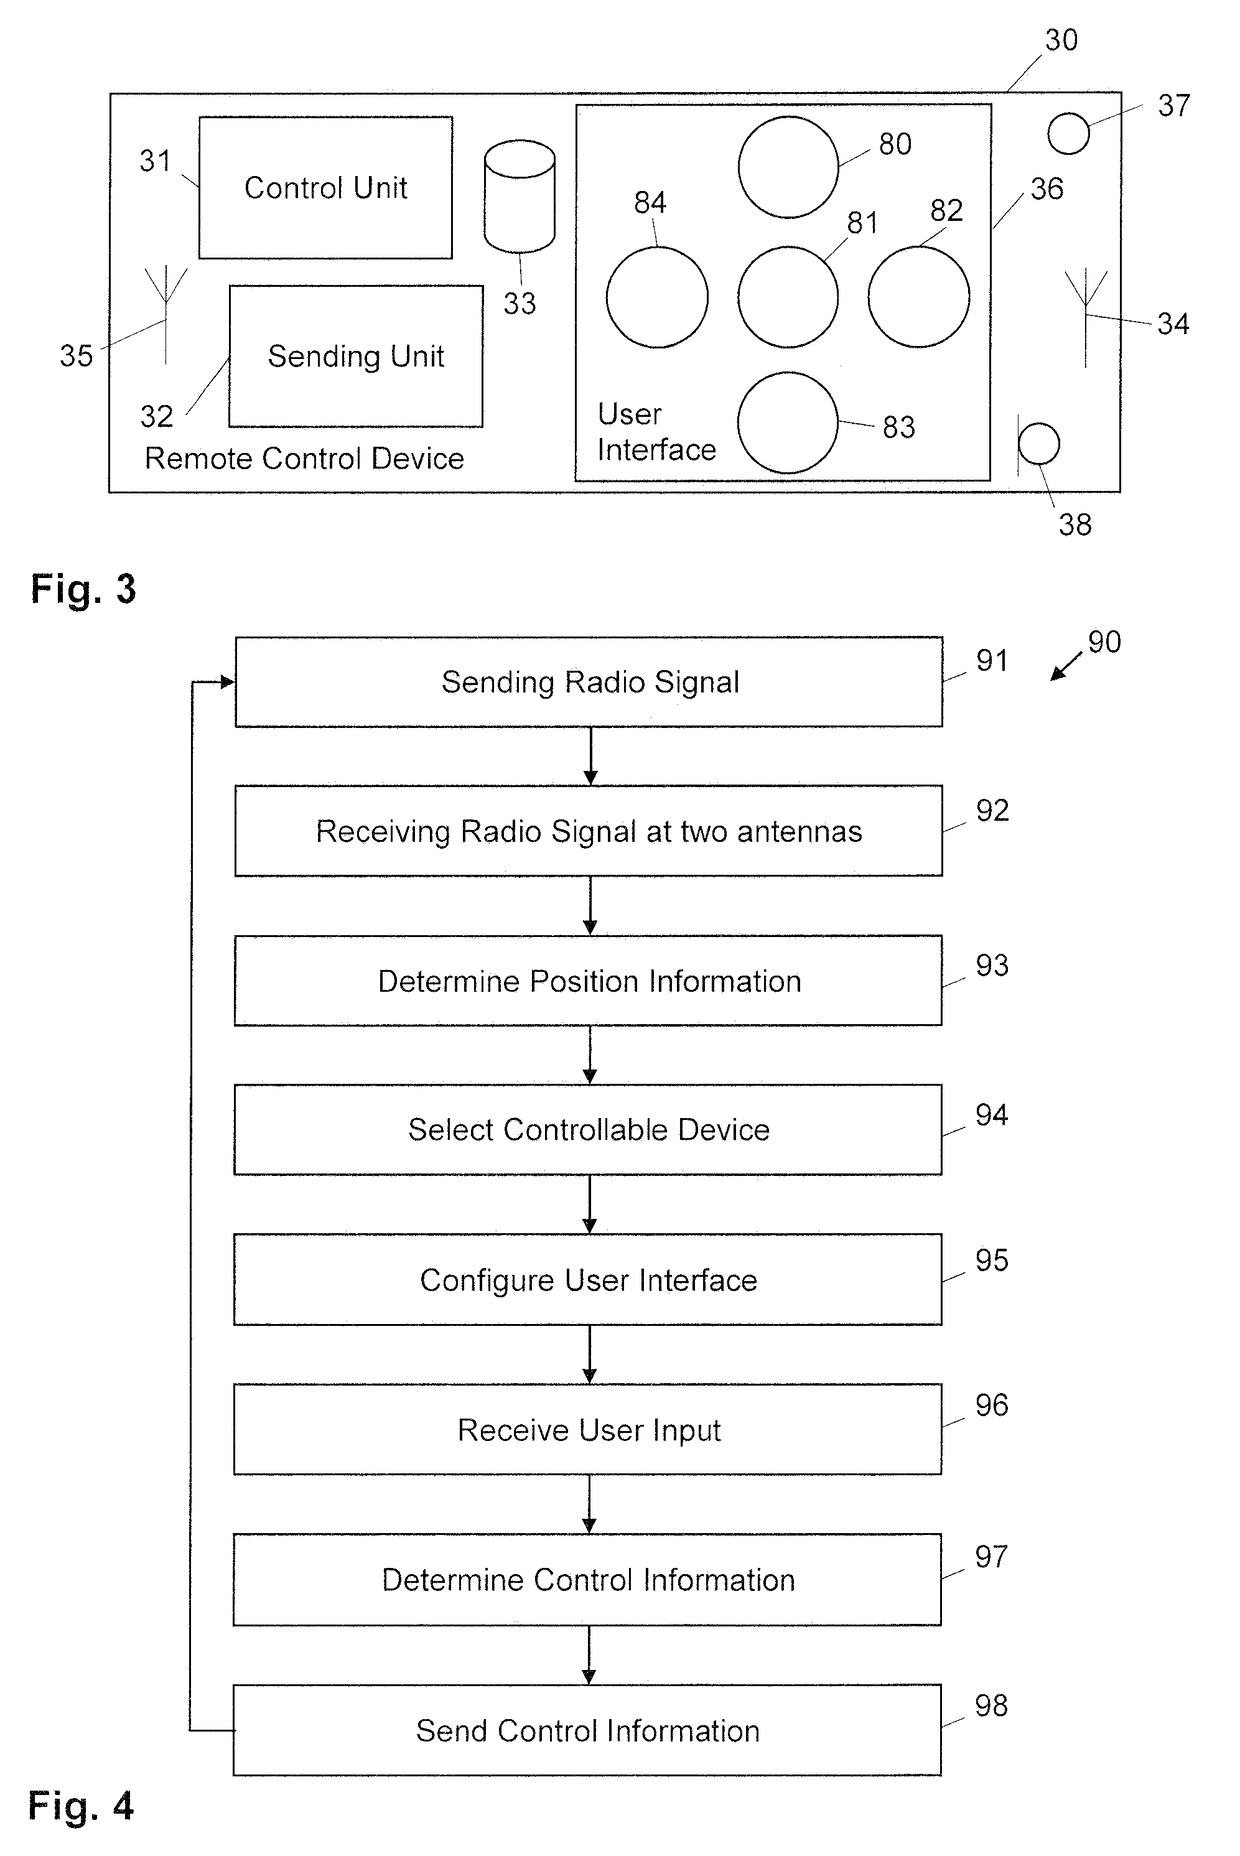 Remote controlling a plurality of controllable devices